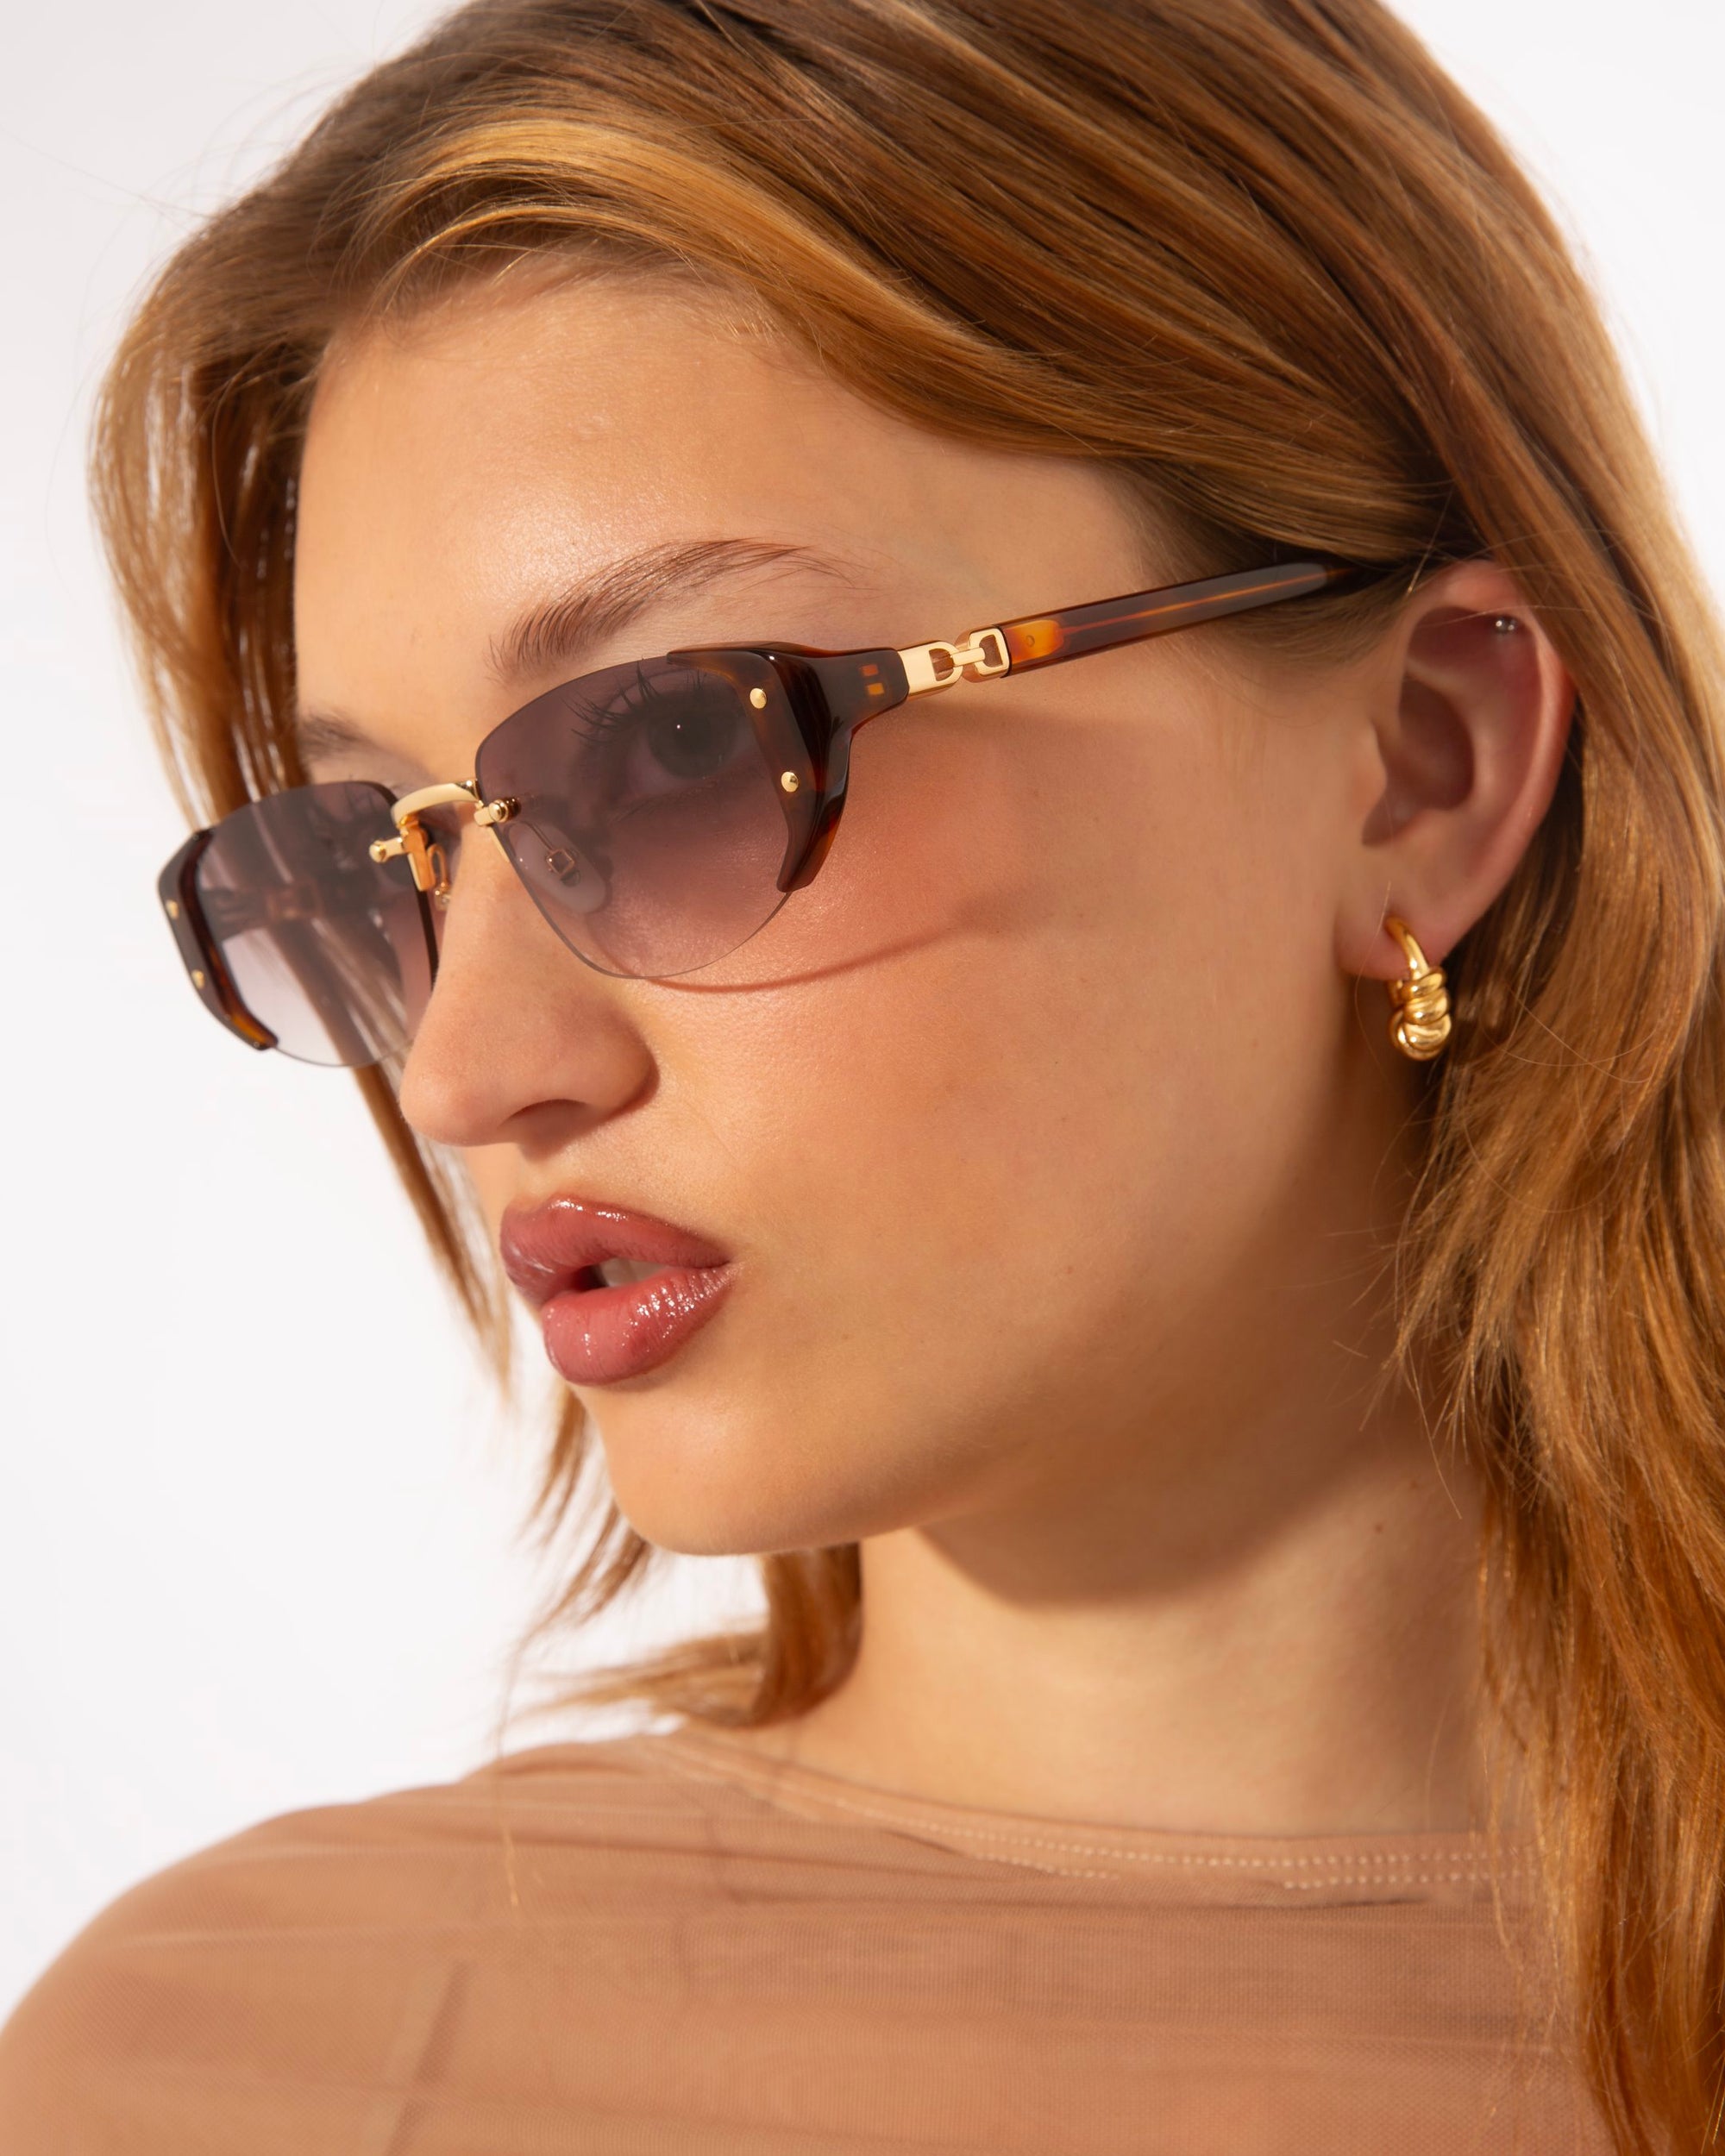 A woman with long, light brown hair is wearing stylish For Art&#39;s Sake® Harbour sunglasses featuring retro-inspired design with gold accents and small hoop earrings. She is dressed in a sheer, nude-colored top. The background is plain white, emphasizing her fashion accessories.